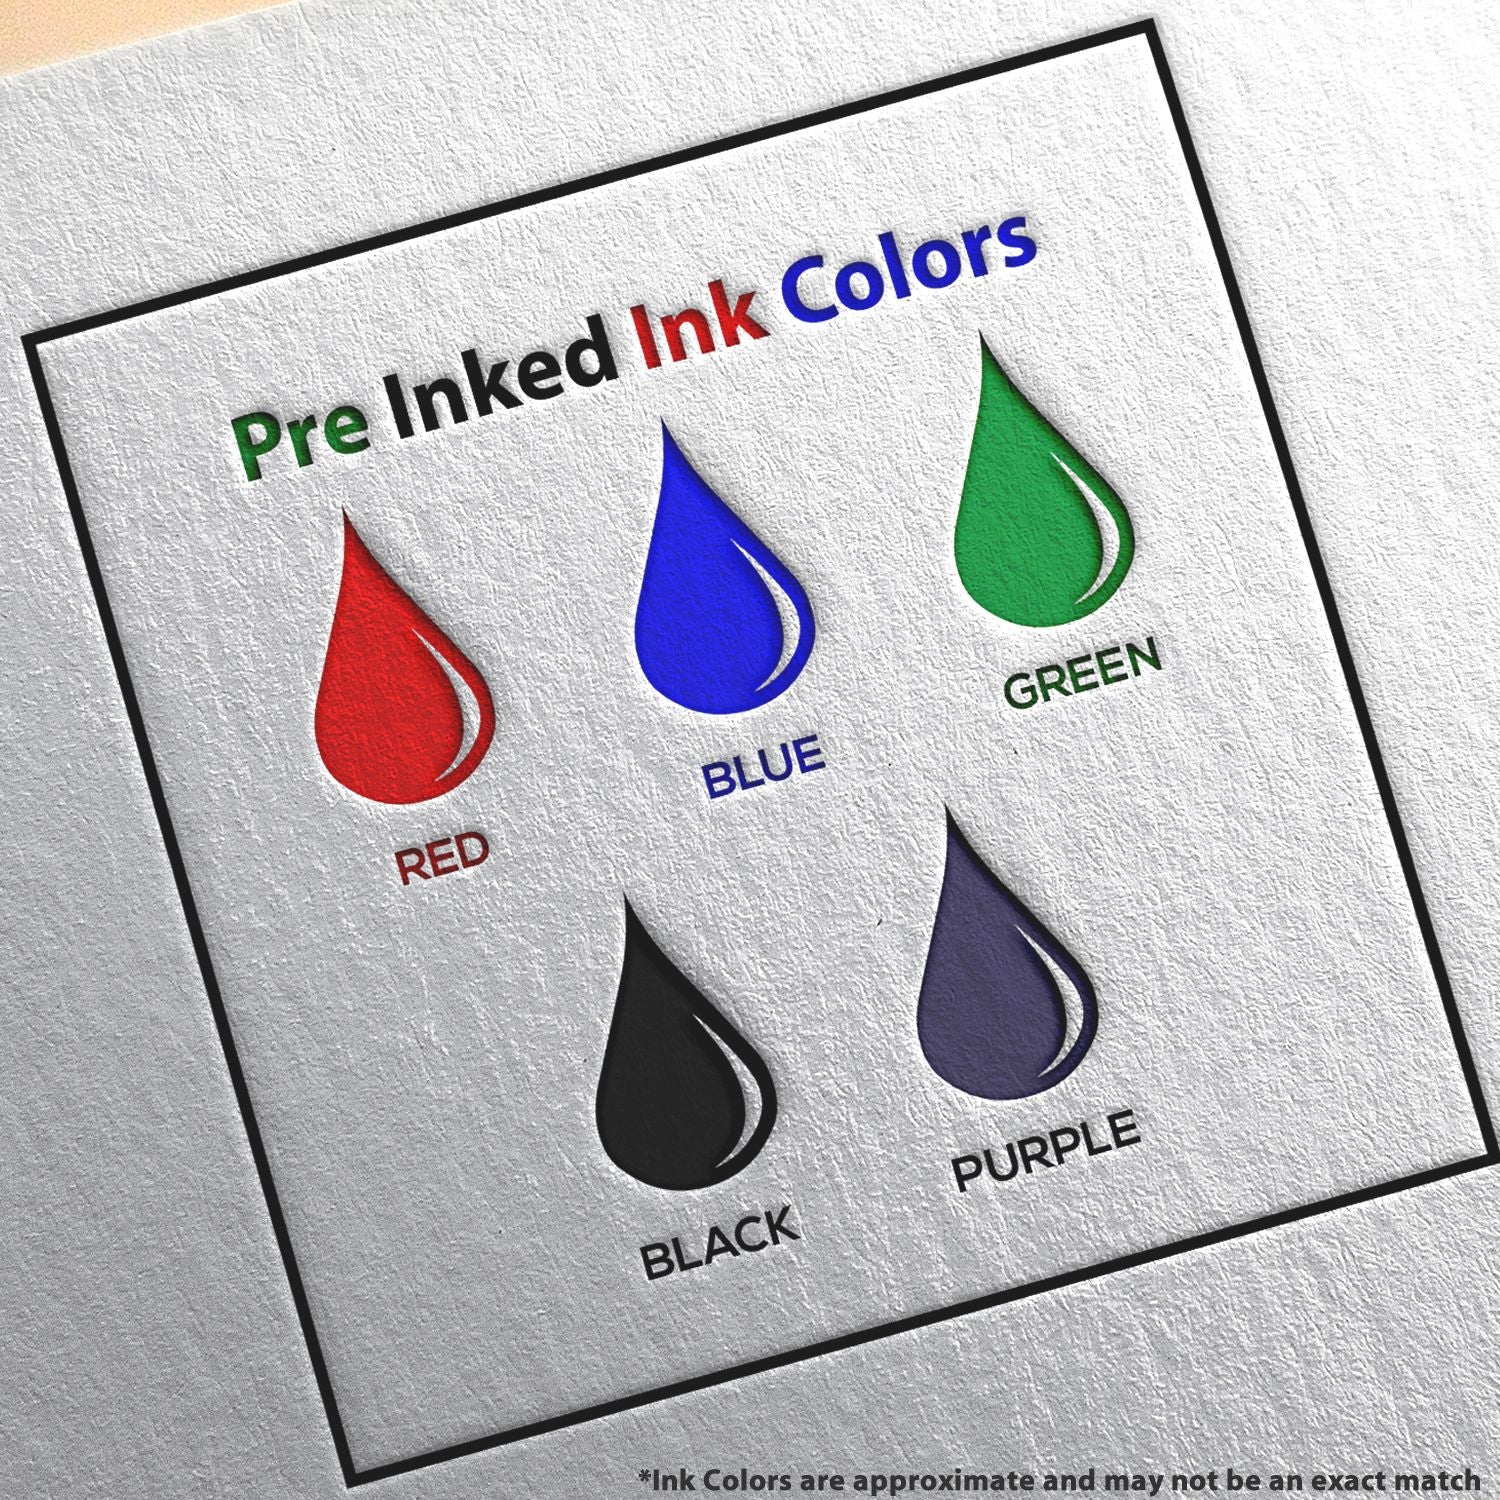 A picture showing the different ink colors or hues available for the Premium MaxLight Pre-Inked South Dakota Engineering Stamp product.